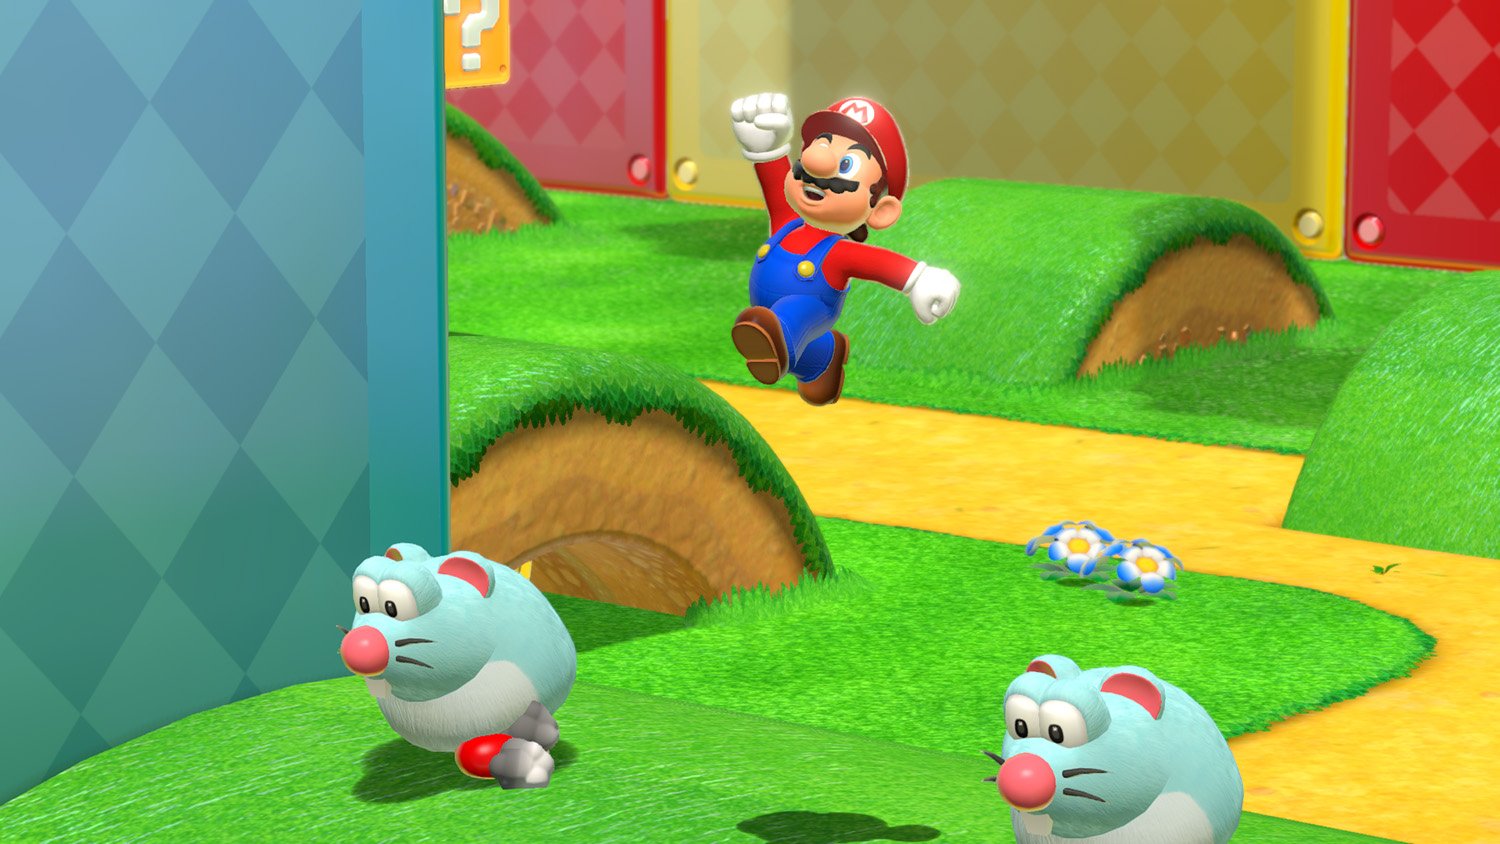 The Nintendo Mar10 Day Sale includes Super Mario 3D World + Bowser's Fury.